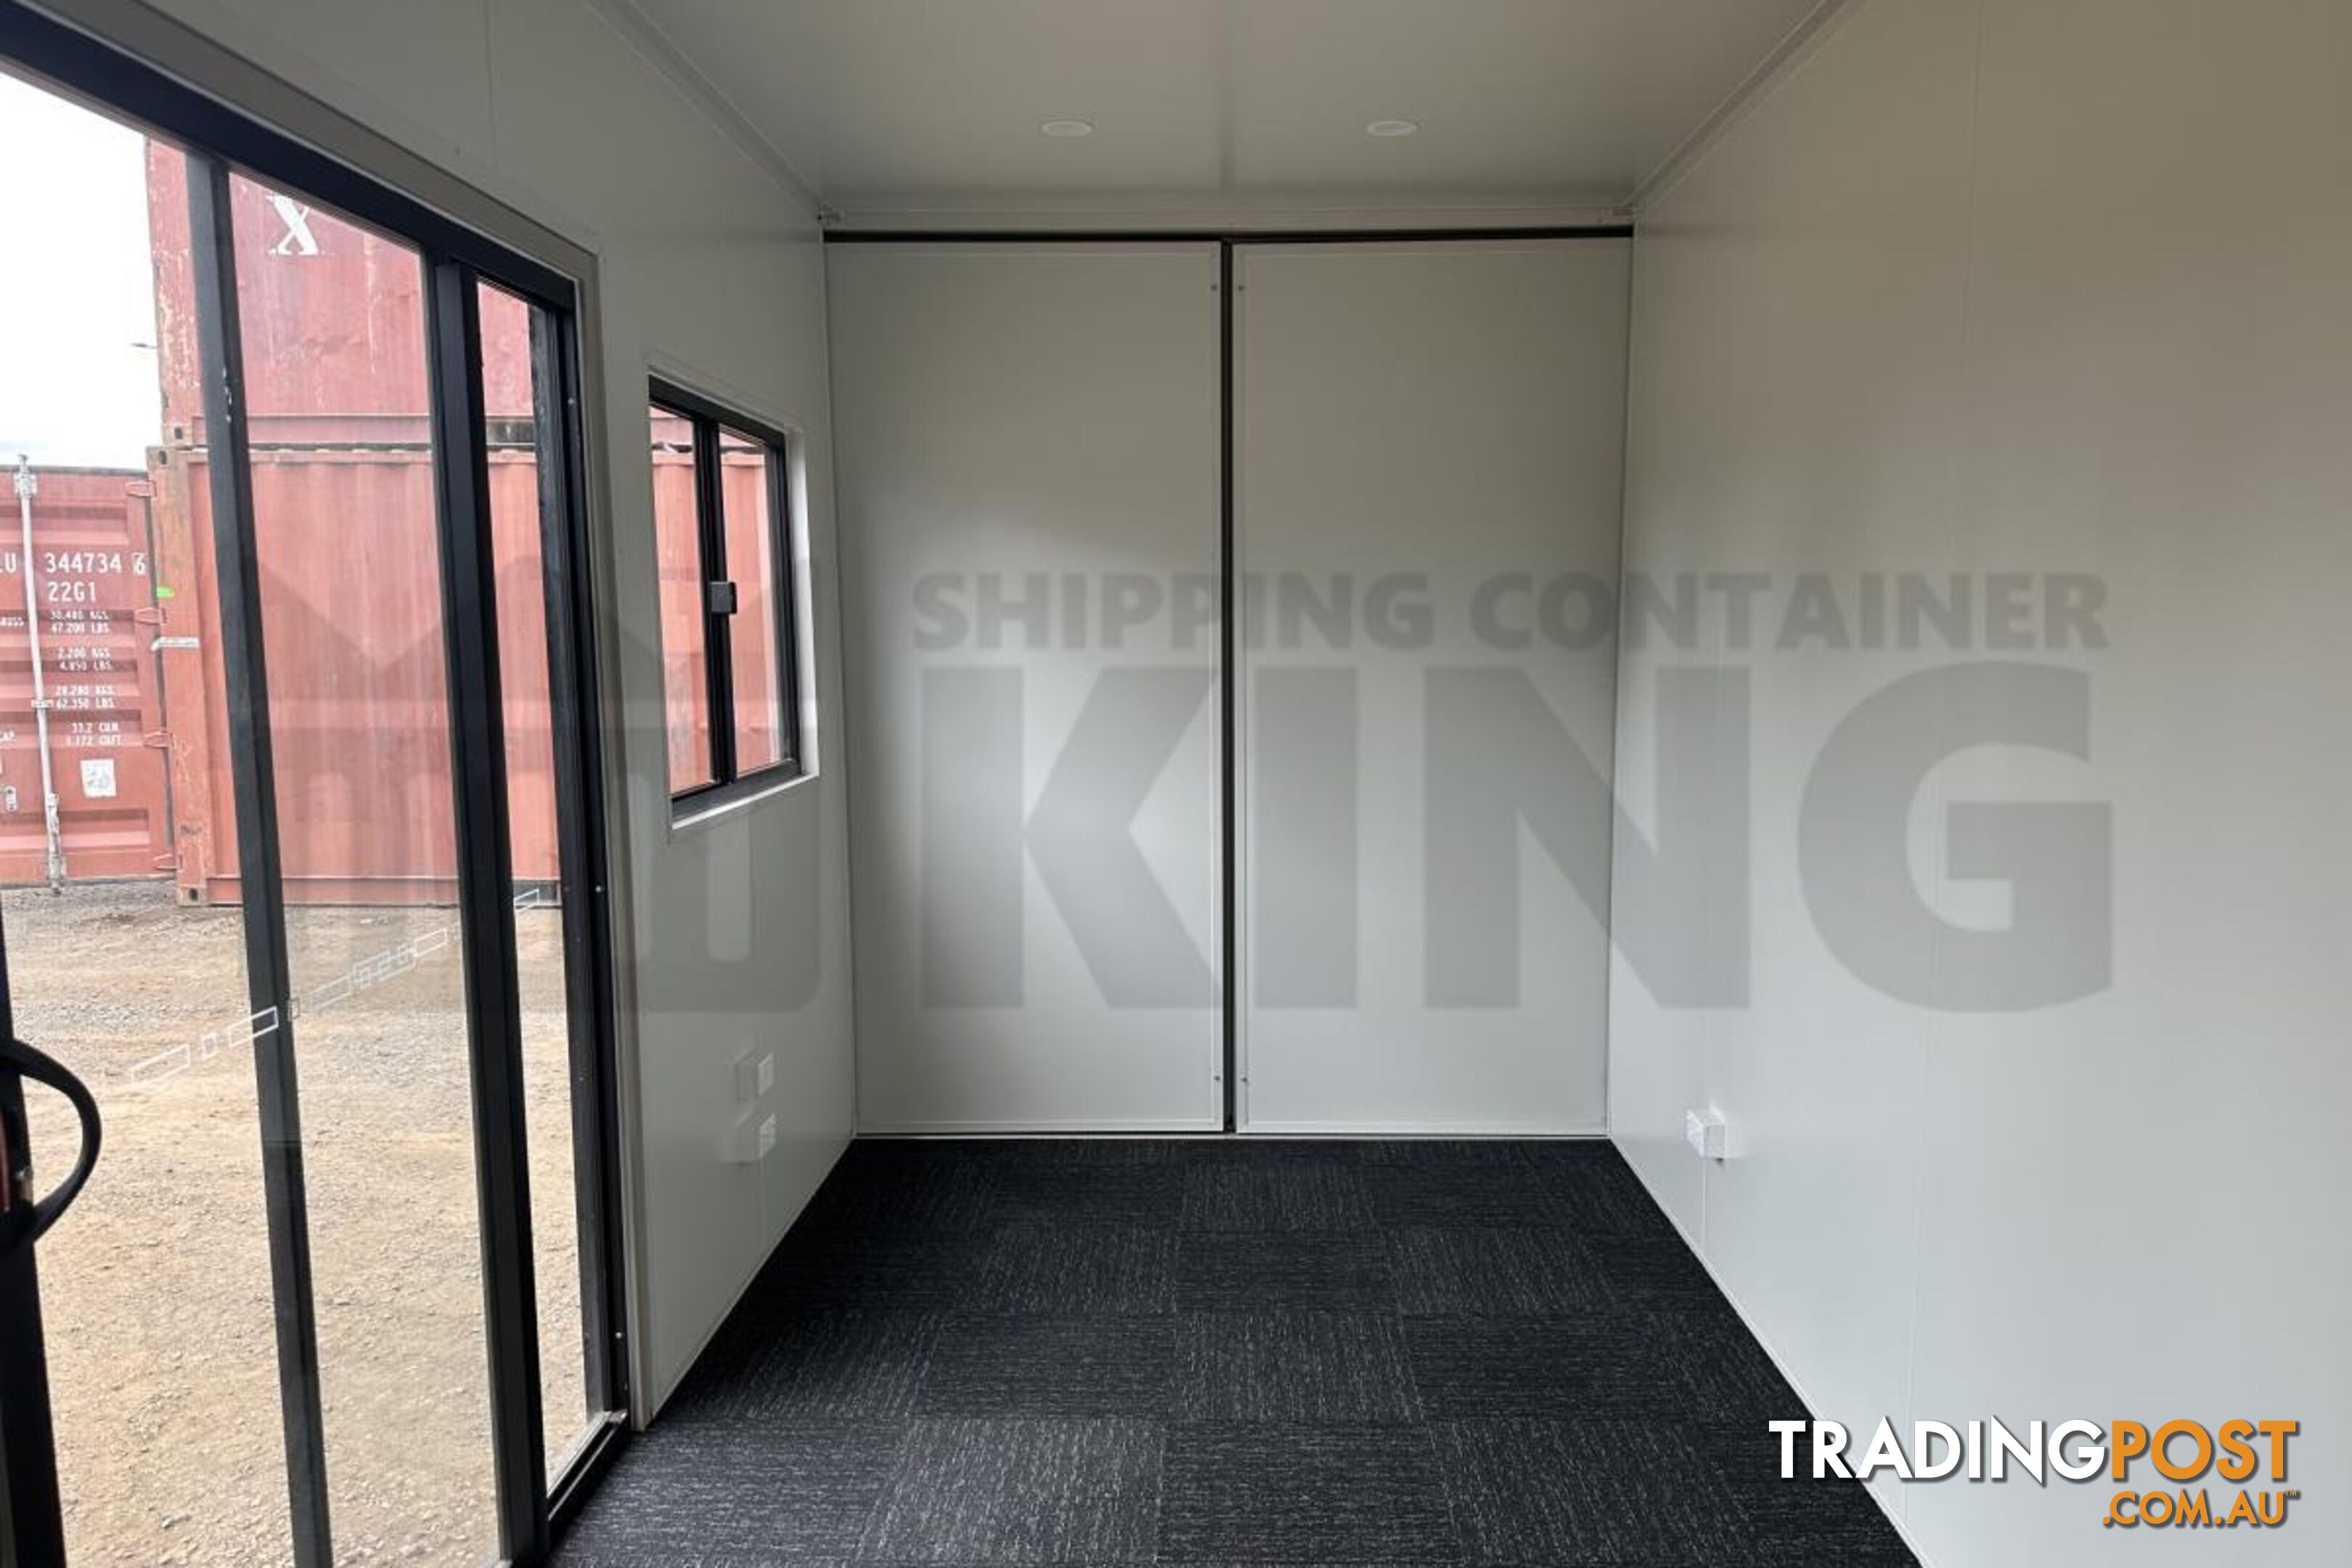 20' SHIPPING CONTAINER OFFICE "ACACIA" (HIGH END) - in Toowoomba